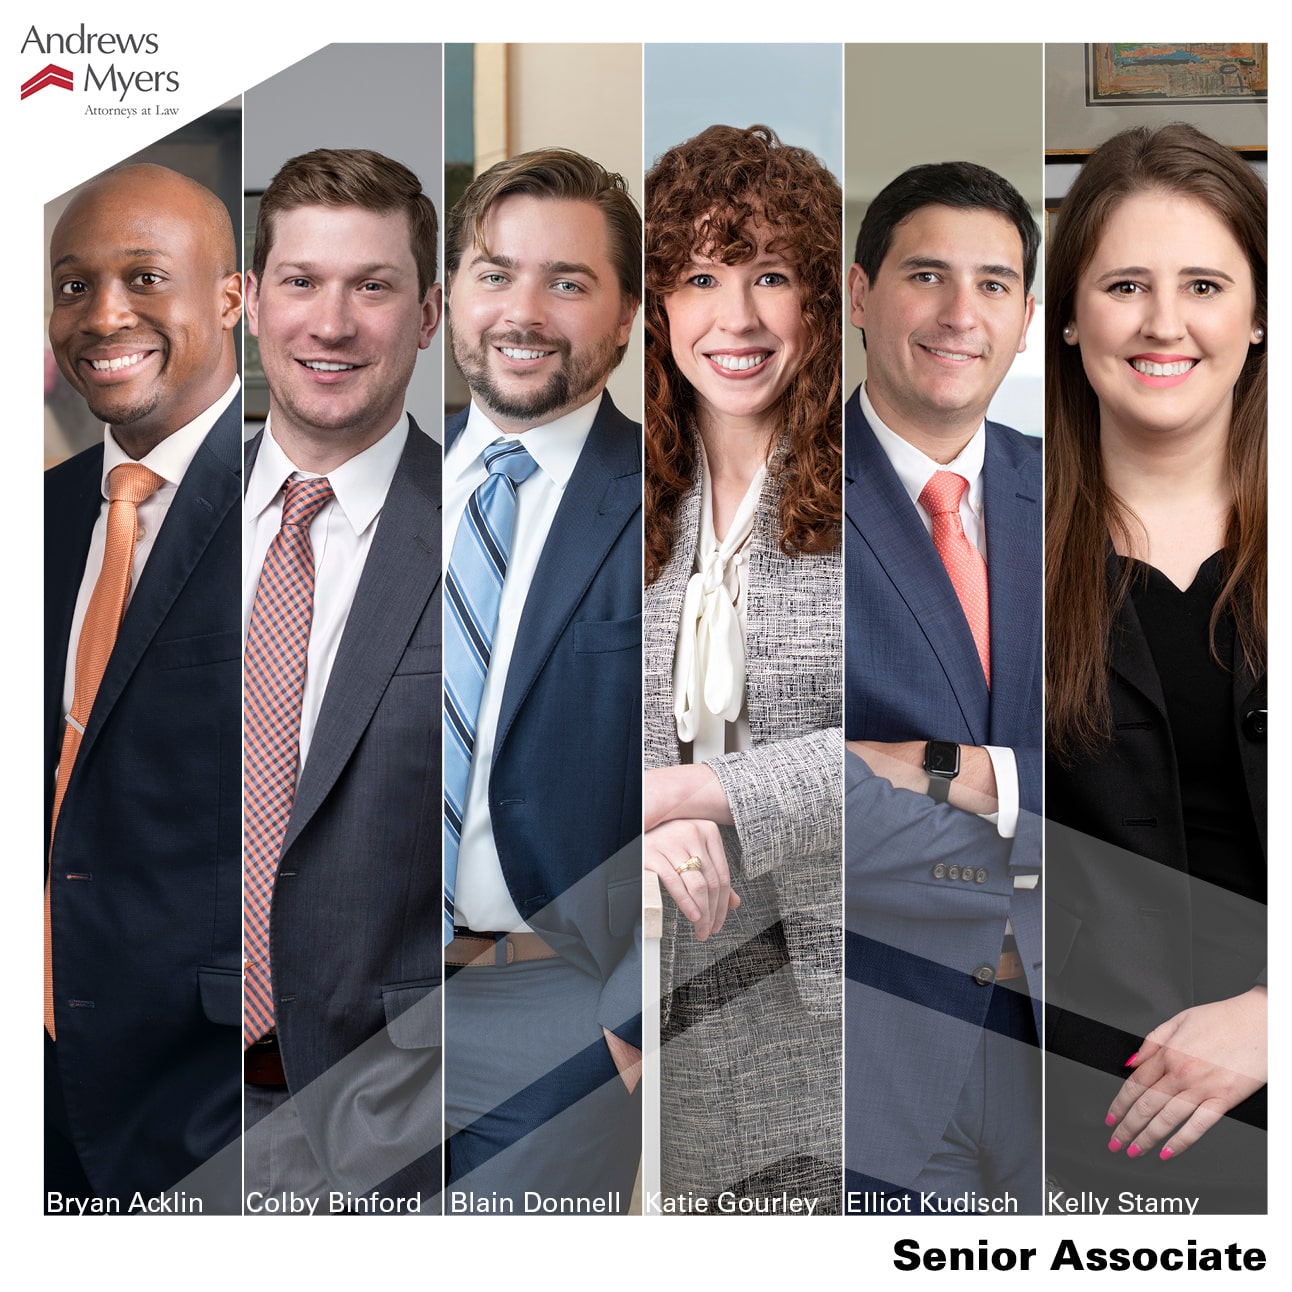 Four men and two women attorneys dressed in professional attire.